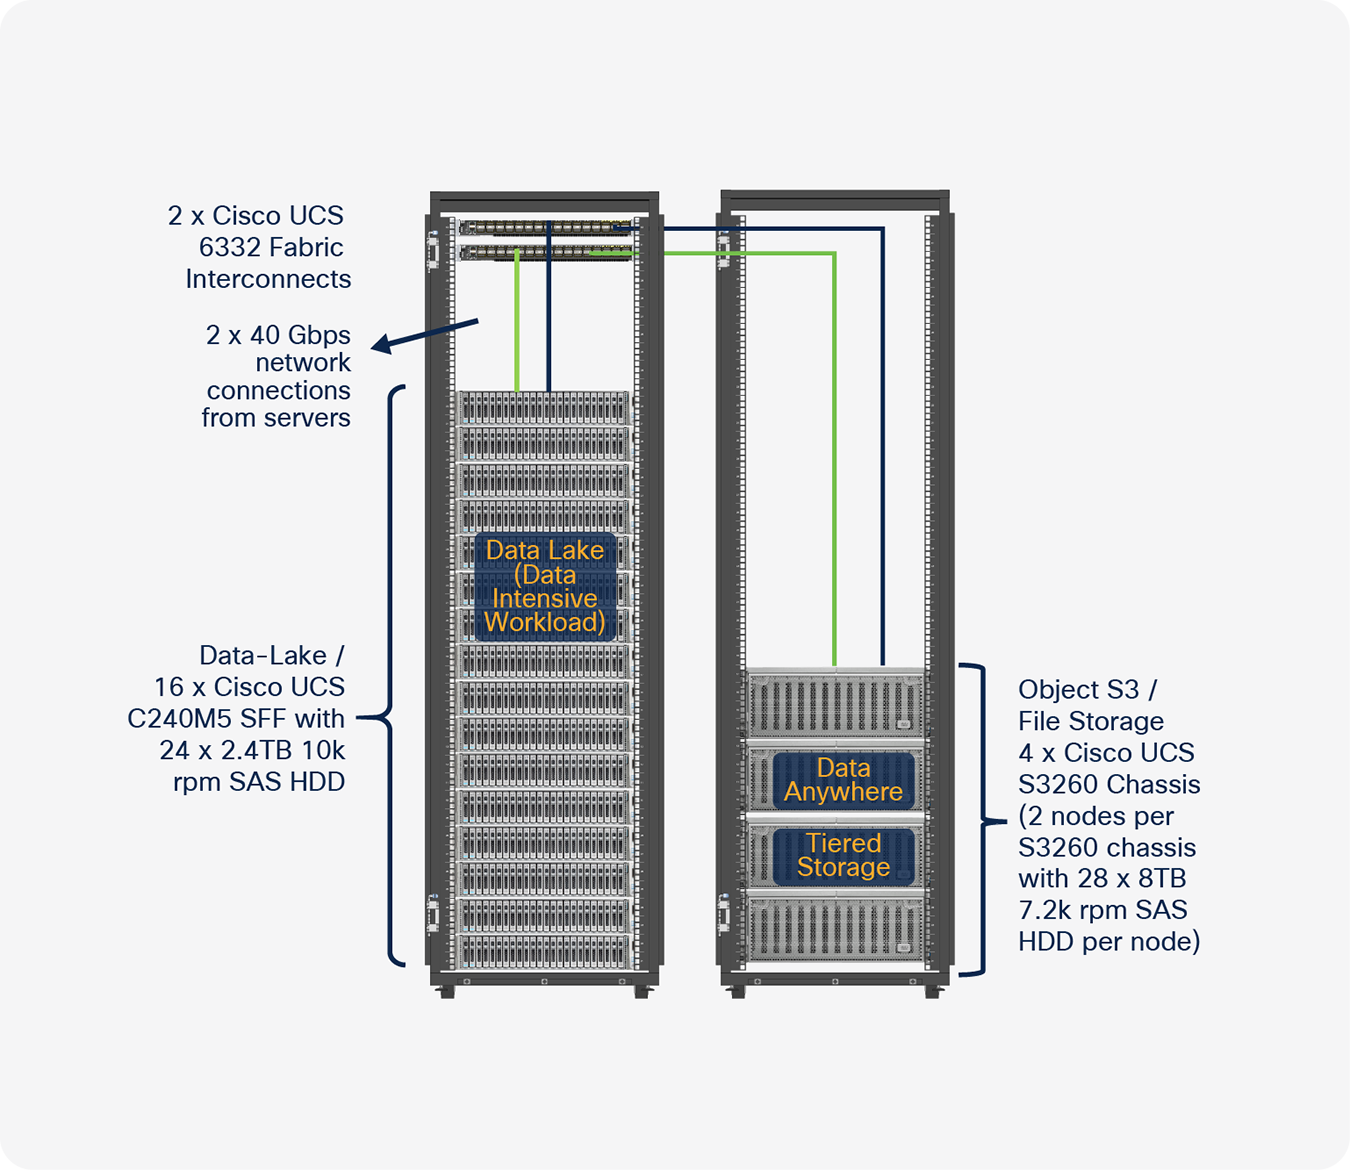 Petabytes of Hadoop data consolidated in a single rack with 8 Cisco UCS S3260 M5 servers